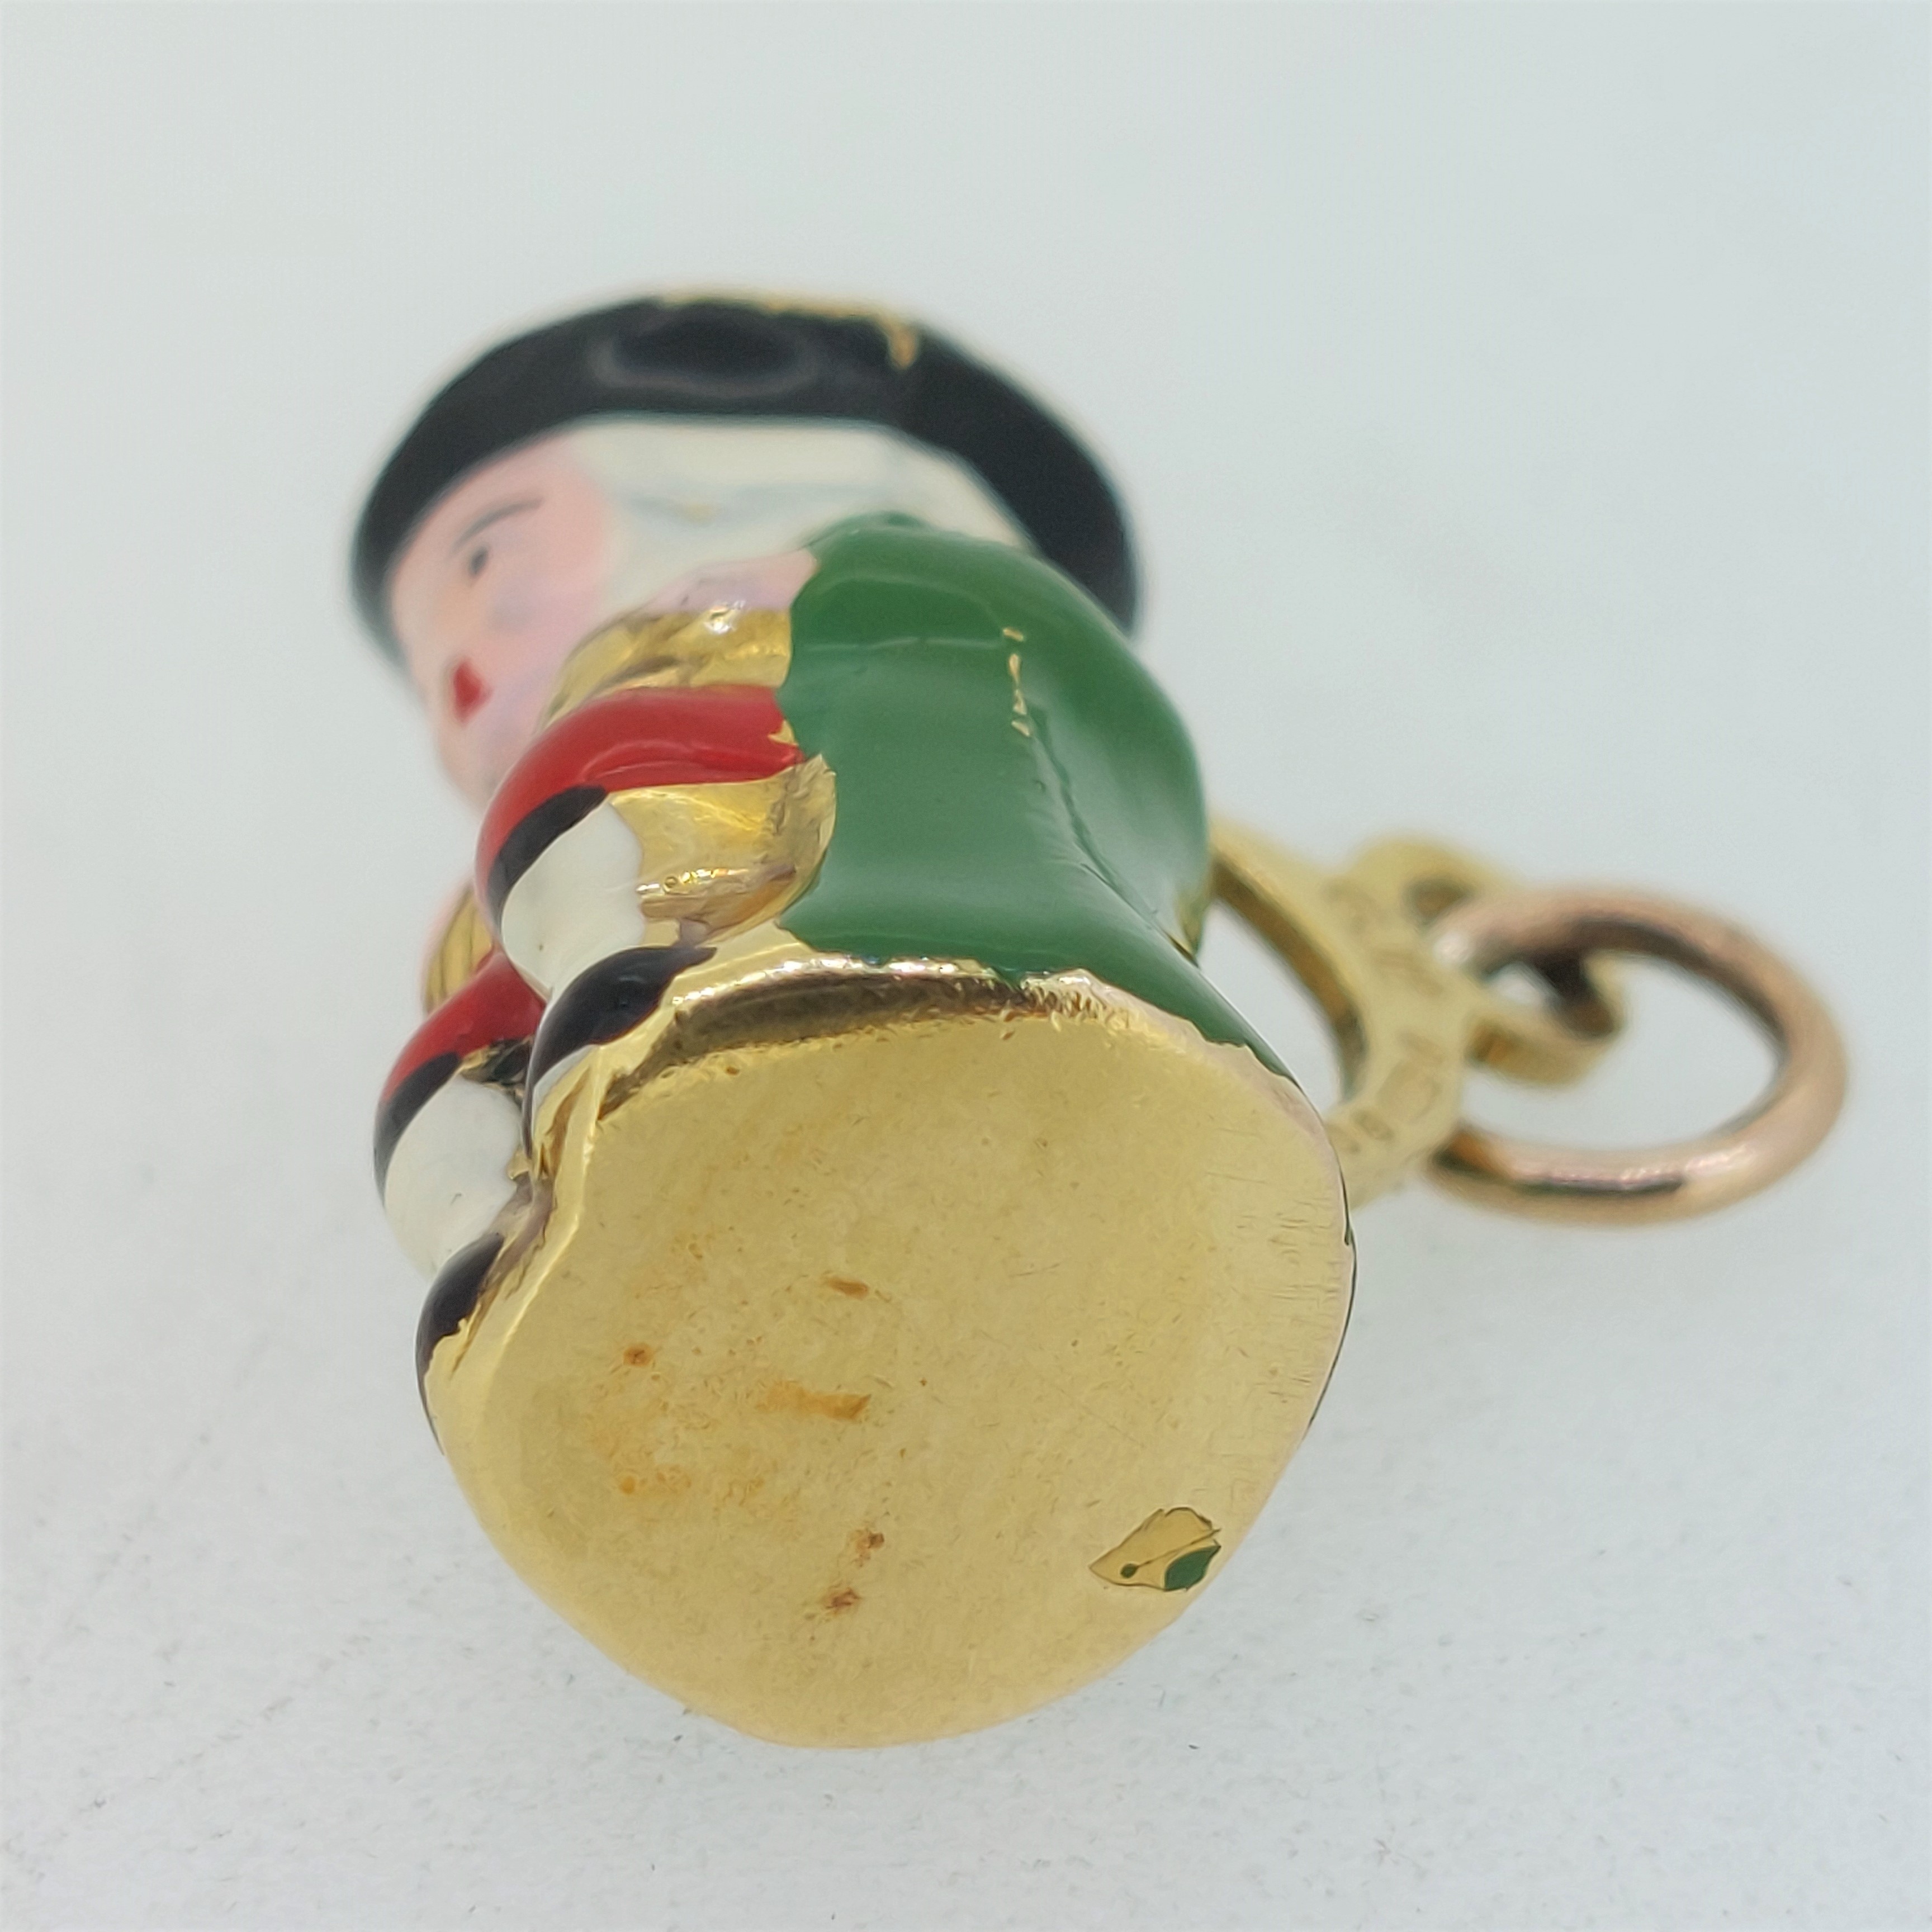 9ct Yellow Gold (375) Enamelled Toby Jug Charm Pendant - Image 5 of 8